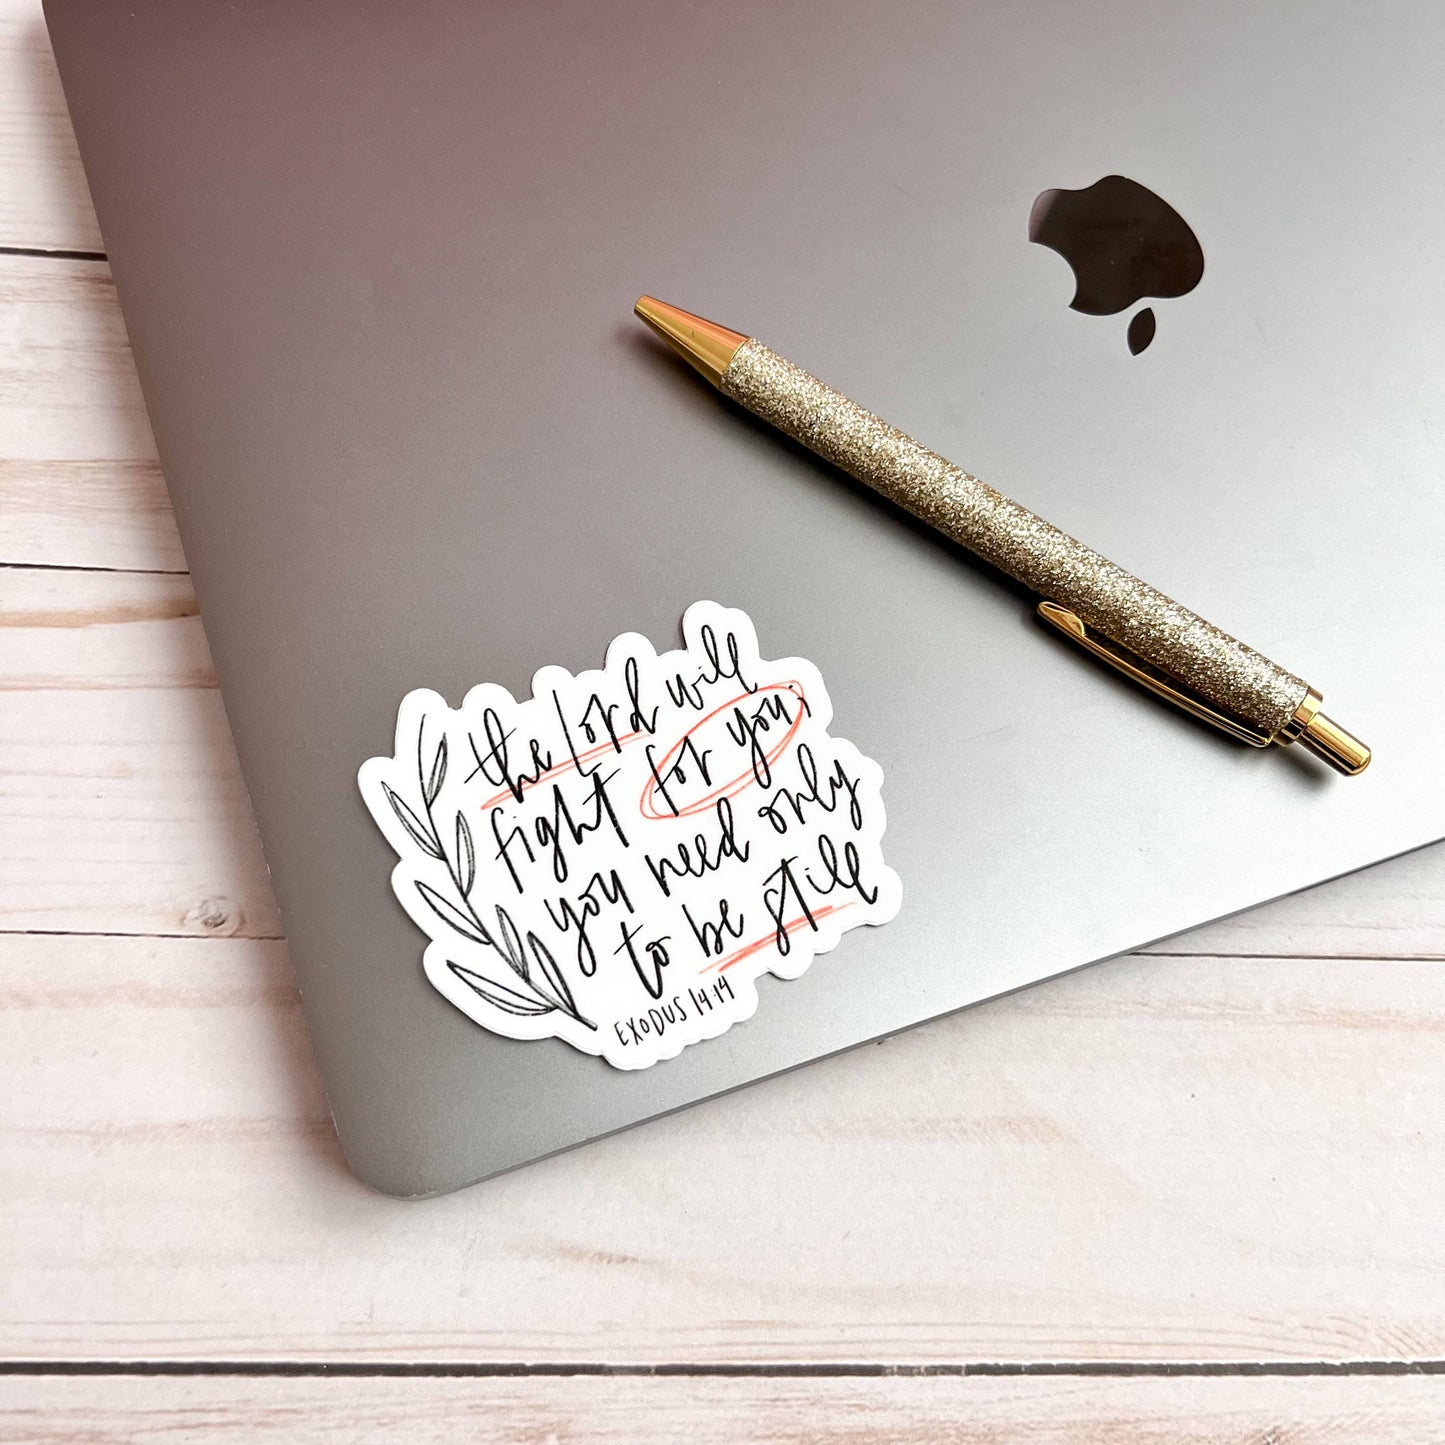 Exodus 14:14 Sticker - Branches: Branches of leaves *FREE SHIPPING with any order over $10